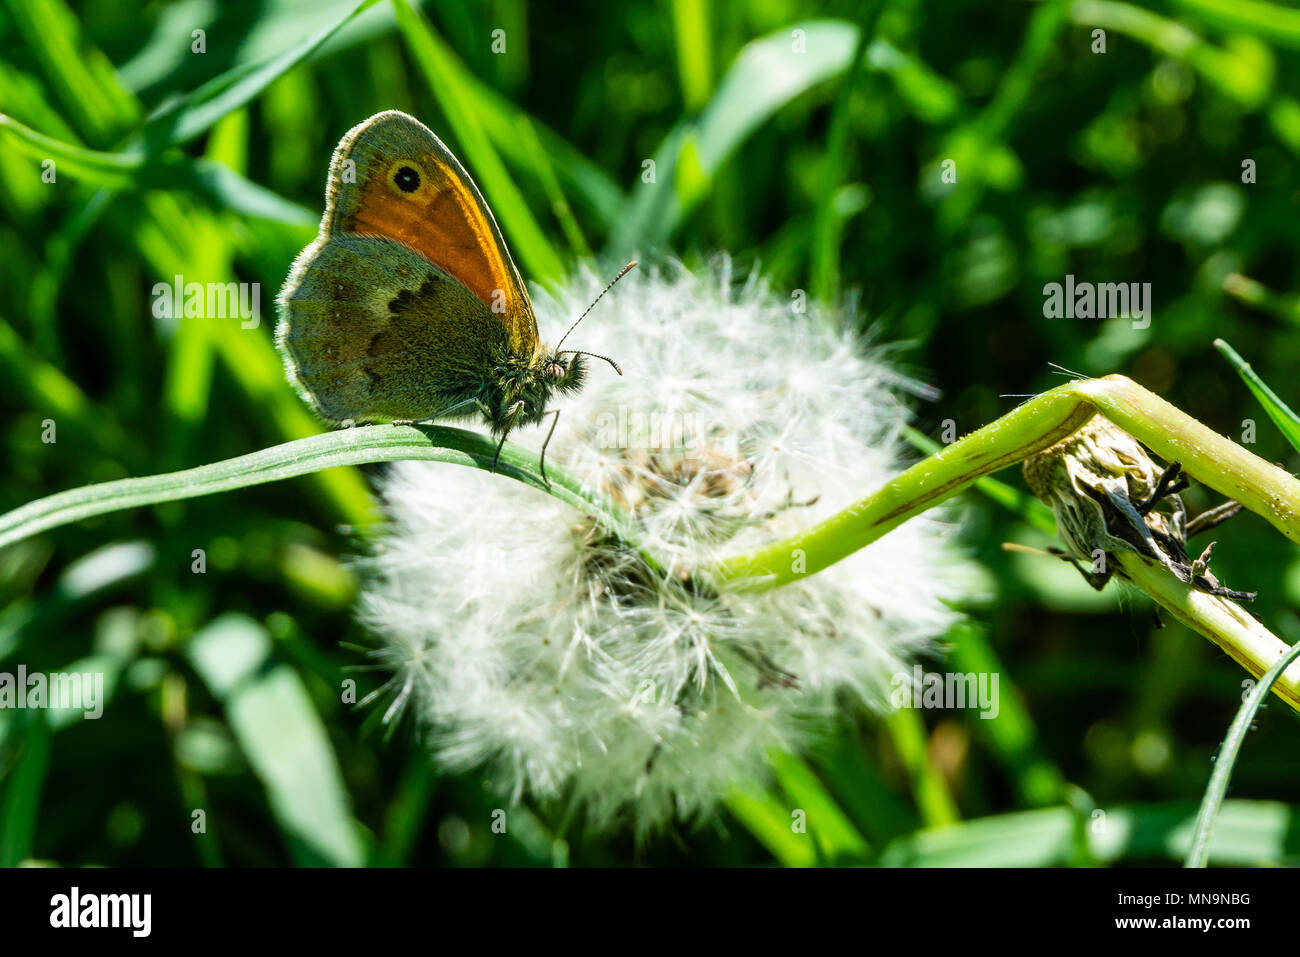 Horizontal photo of small butterfly. Insect is perched in green grass in front of faded dandelion with white fluff. Bug has hairy body and head with n Stock Photo